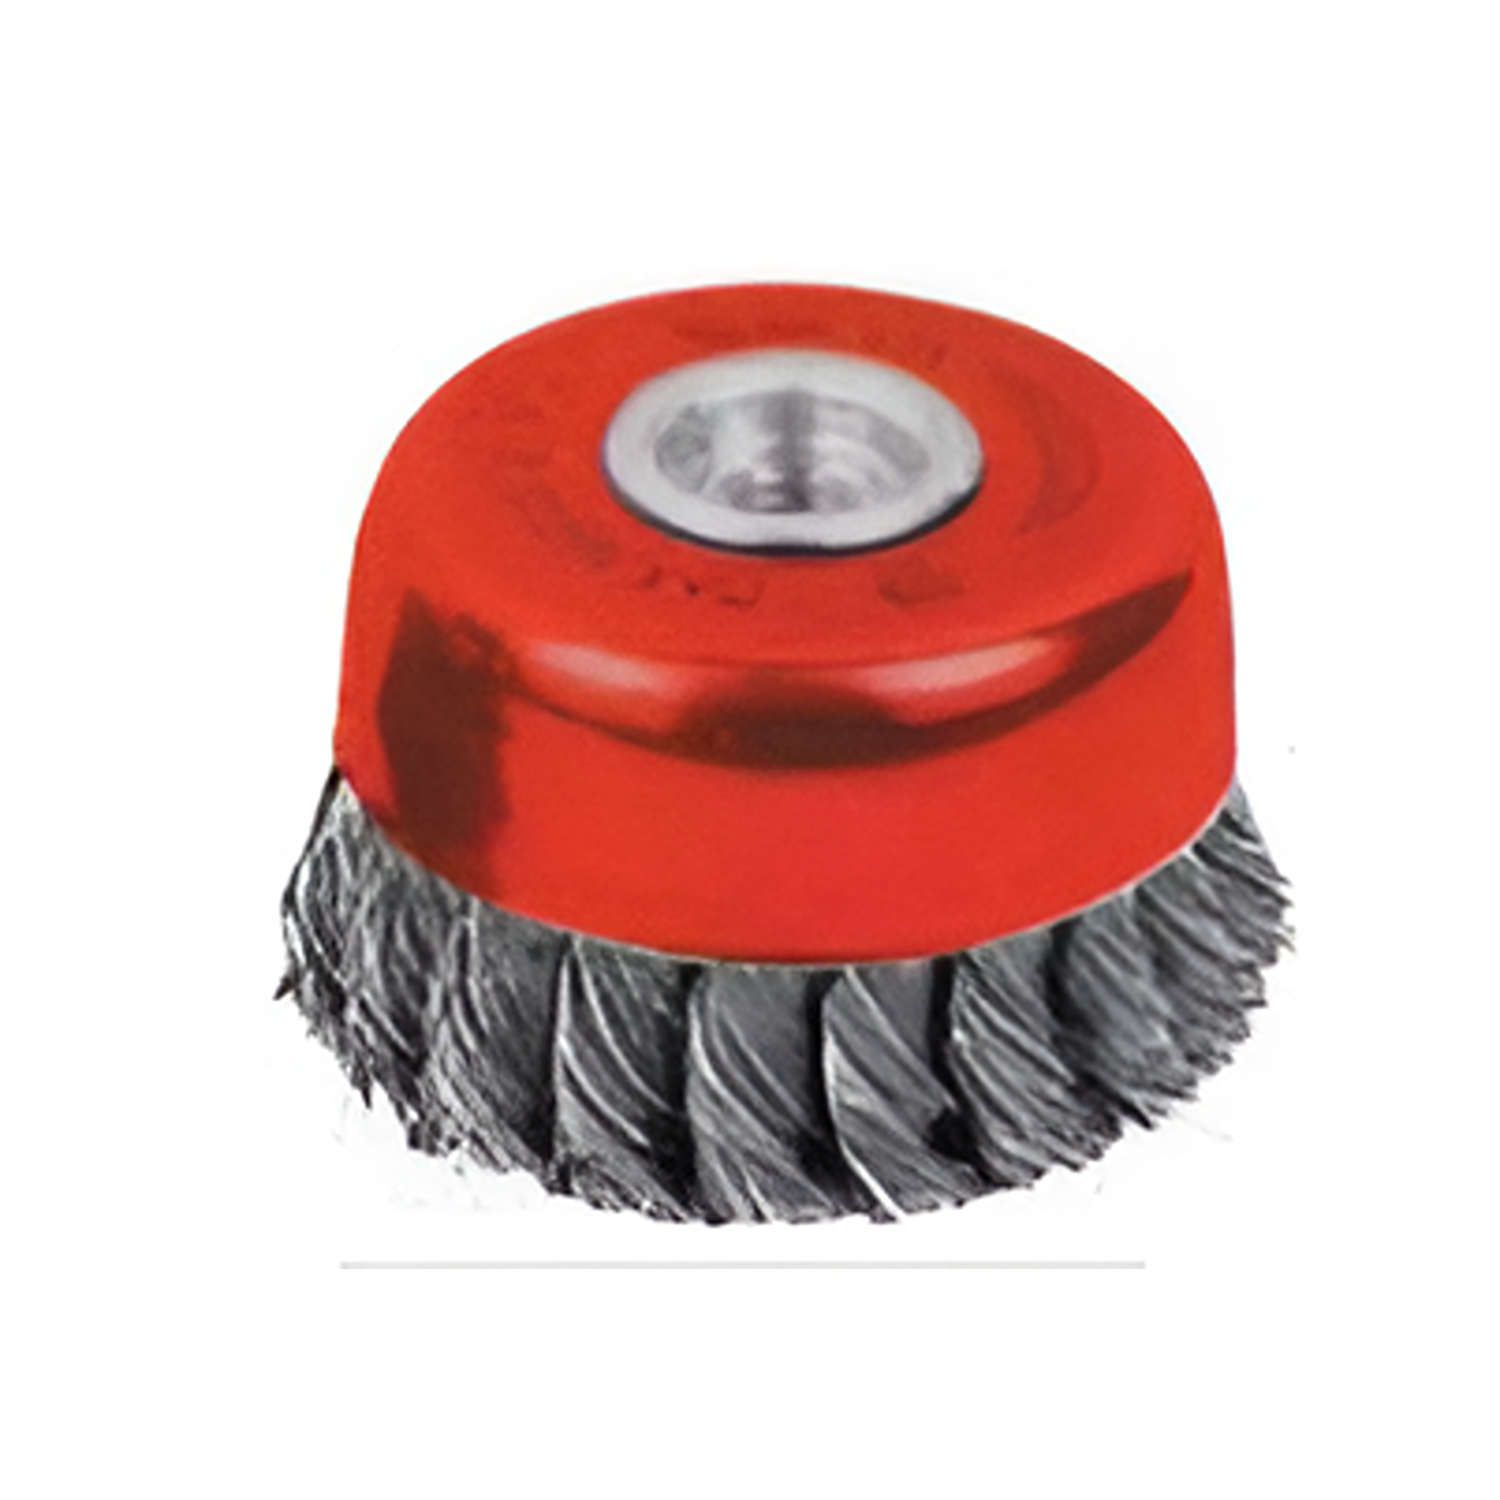 YEW AIK AE00137 NSK Twist Knot Cup Brush (For Air Tool) - Premium Cup Brush from YEW AIK - Shop now at Yew Aik.